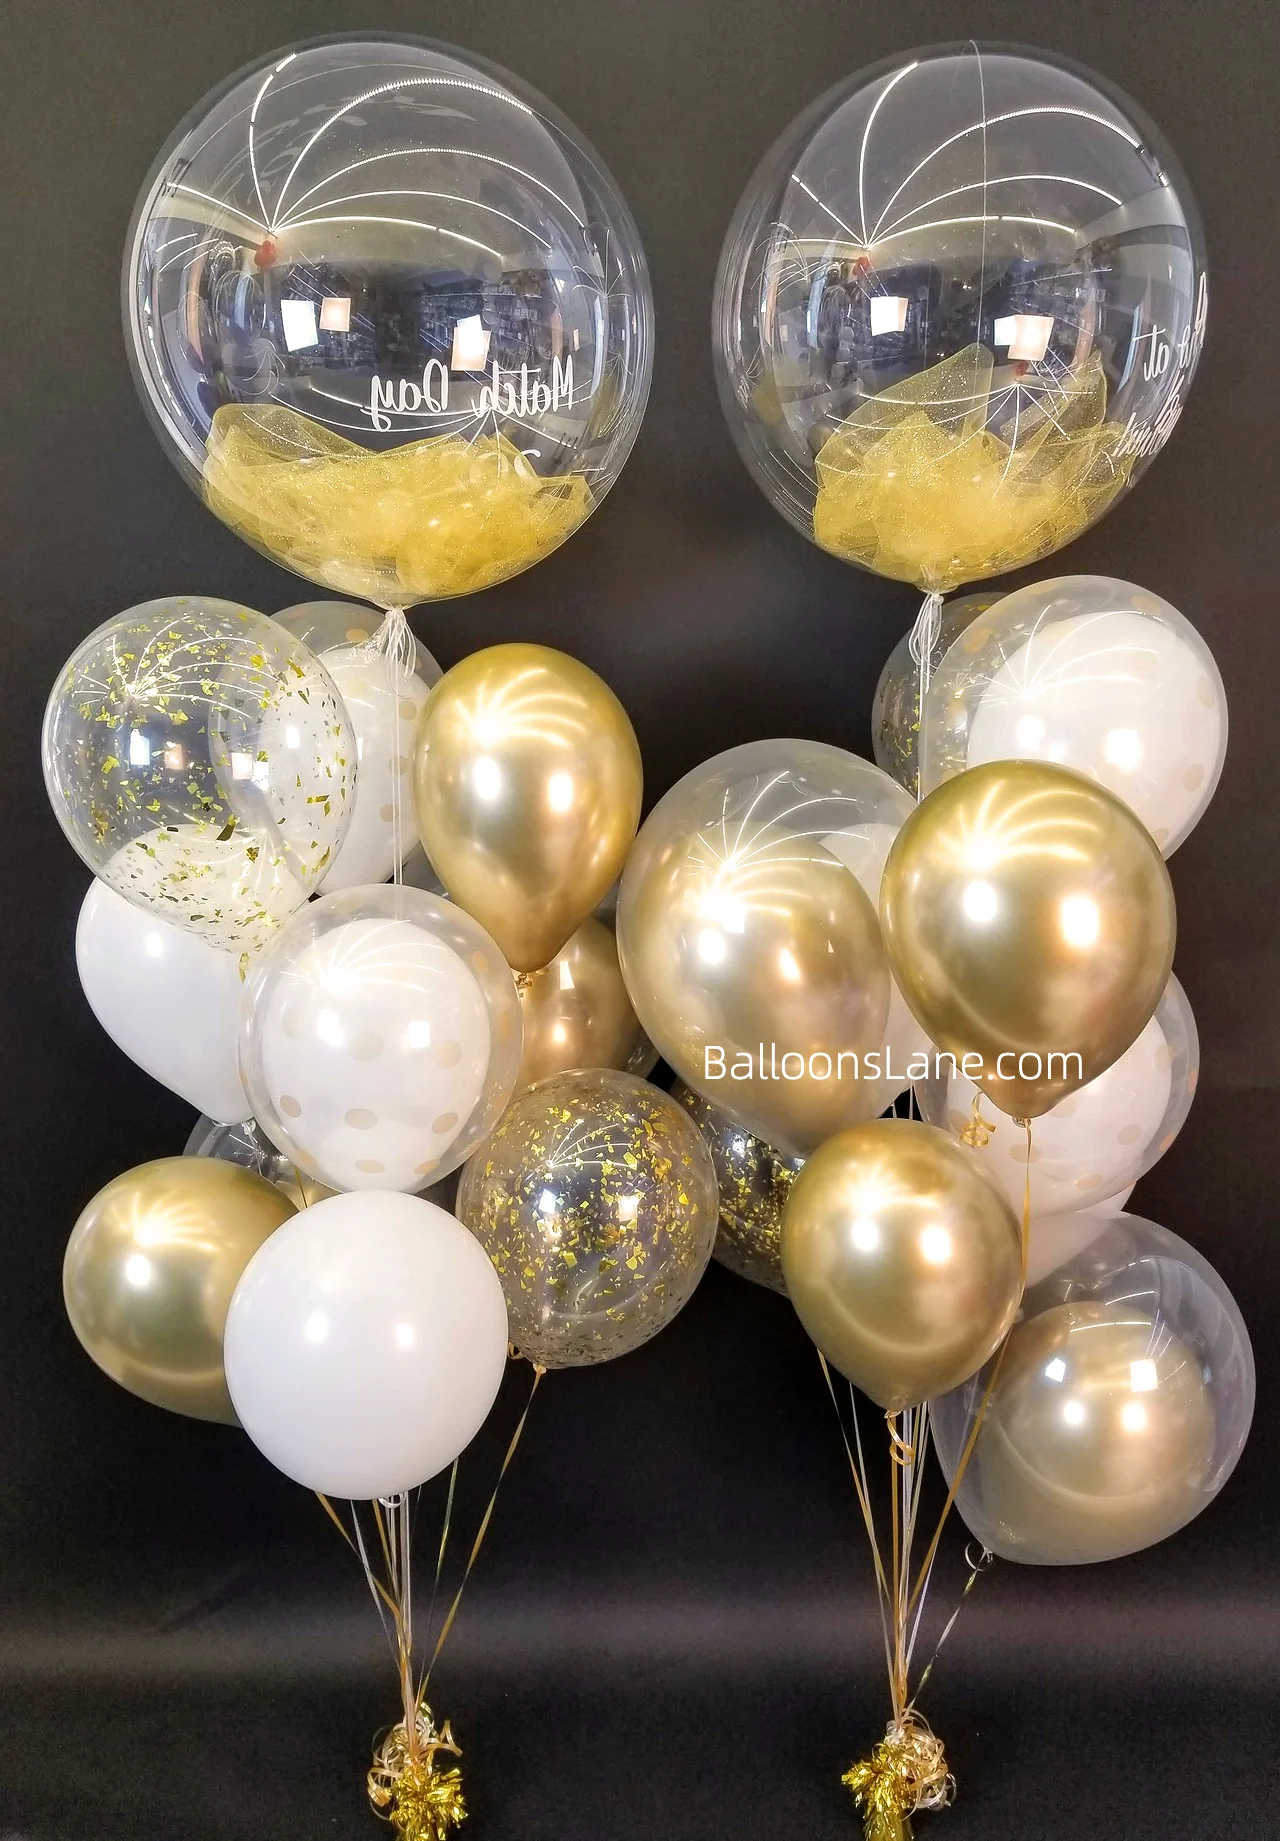 feather balloon with golda nd white balloons arranged in balloons bouquet to celebrate engagment in NJ